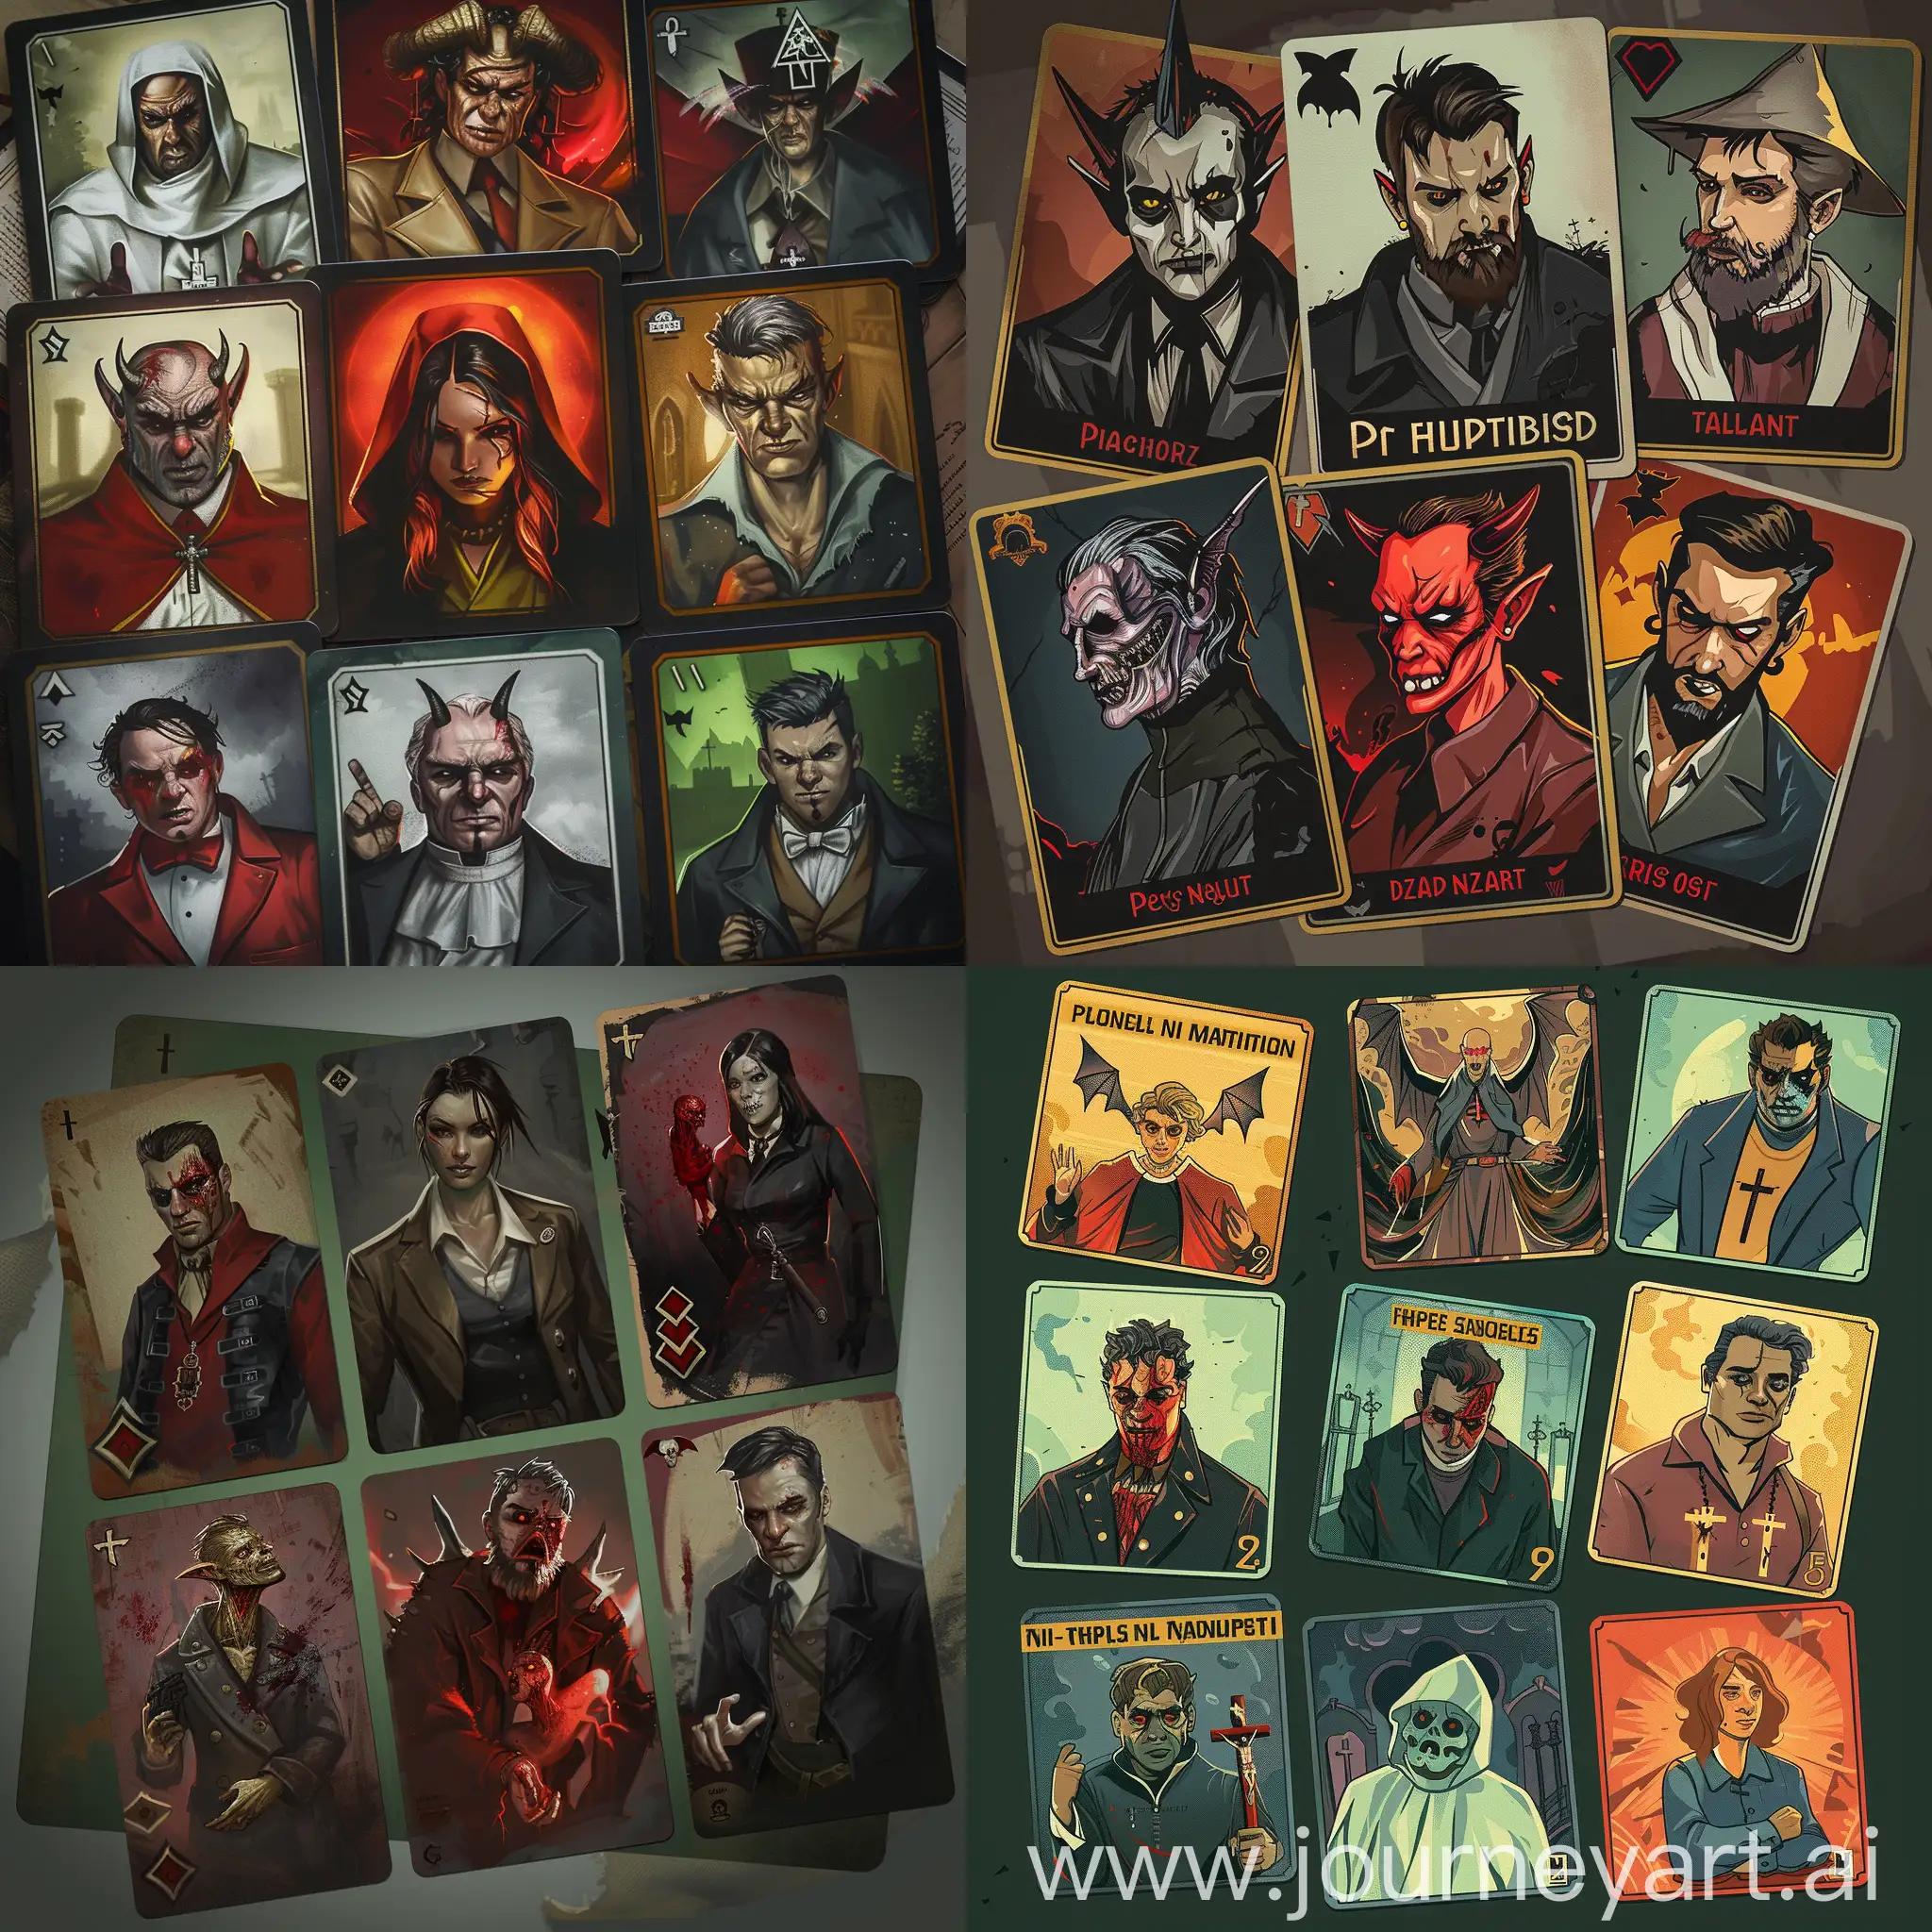 Board-Game-Cards-Devil-Priest-Possessed-and-Normal-People